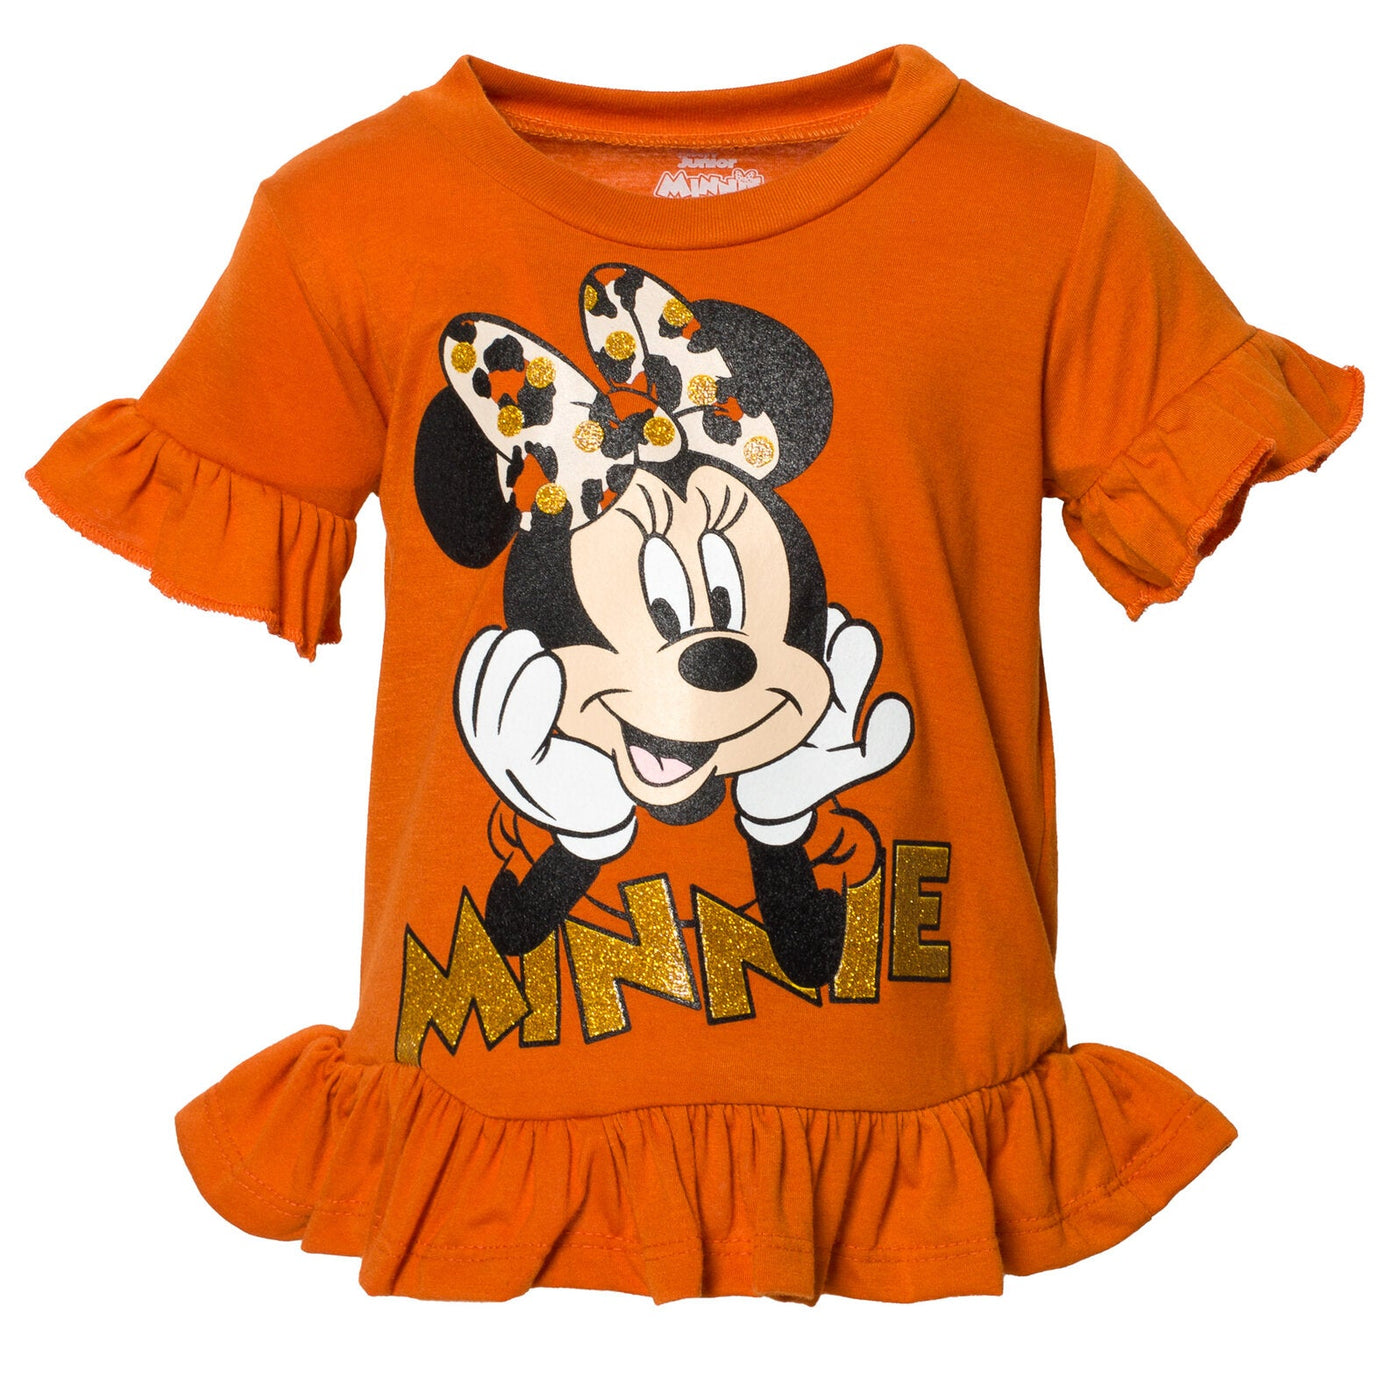 Disney Minnie Mouse Mickey Mouse T-Shirt and Shorts Outfit Set - imagikids